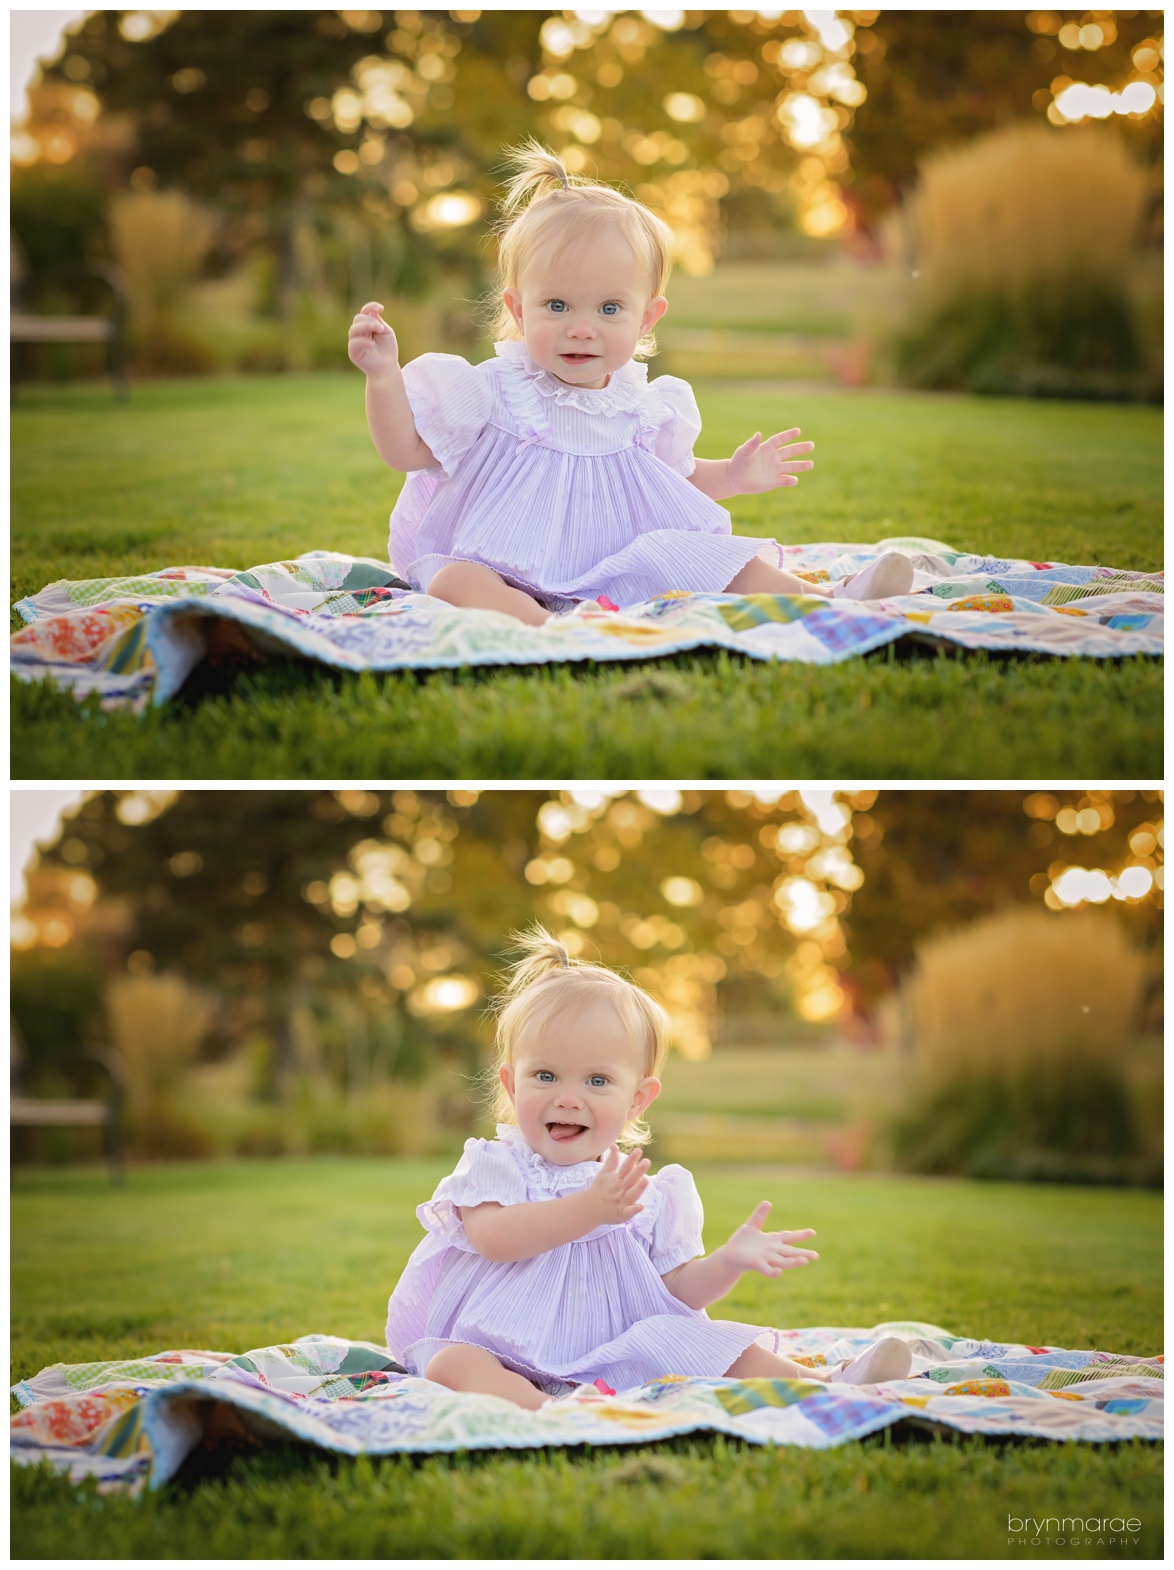 nora-1yr-dtc-family-photography-444-Edit